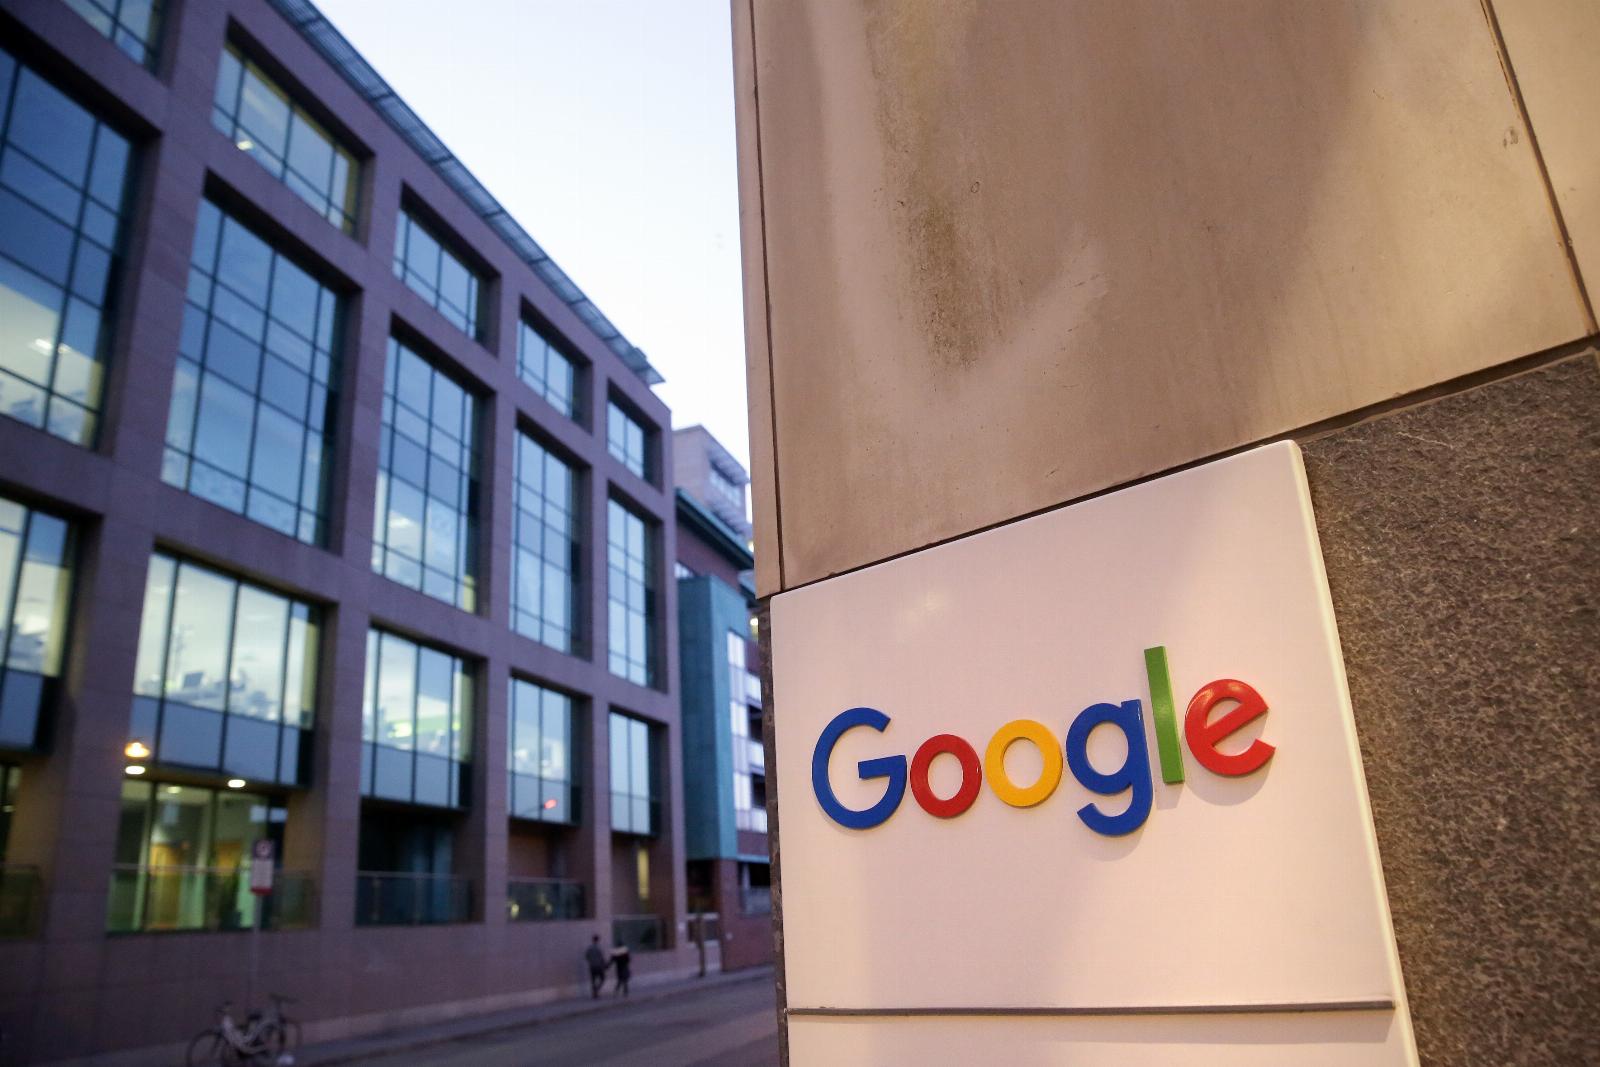 Google to go further on ads transparency and data access for researchers as EU digital rulebook reboot kicks in